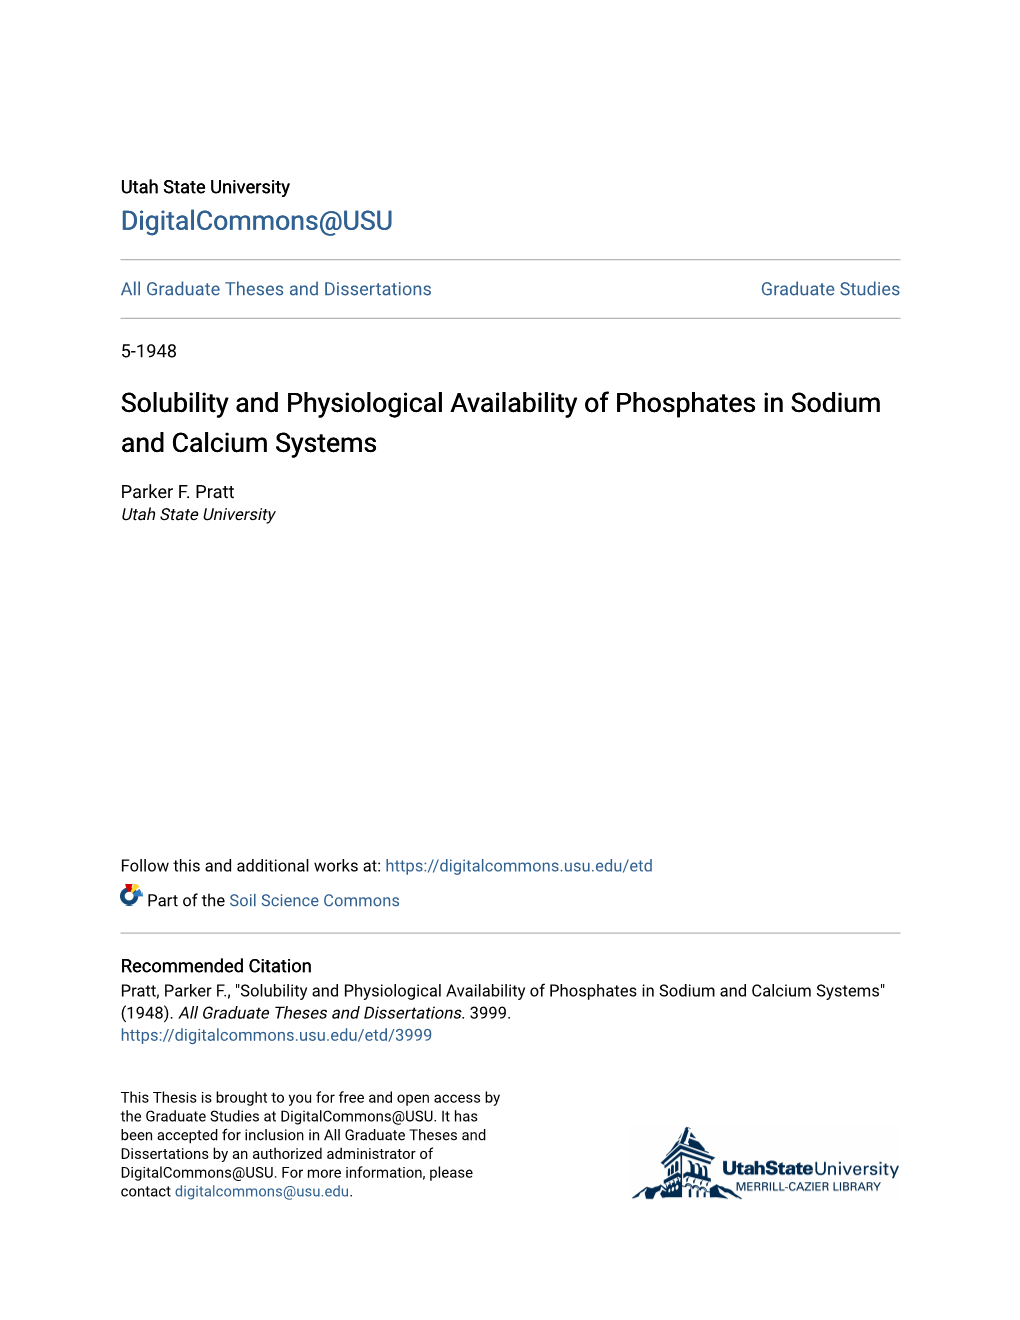 Solubility and Physiological Availability of Phosphates in Sodium and Calcium Systems